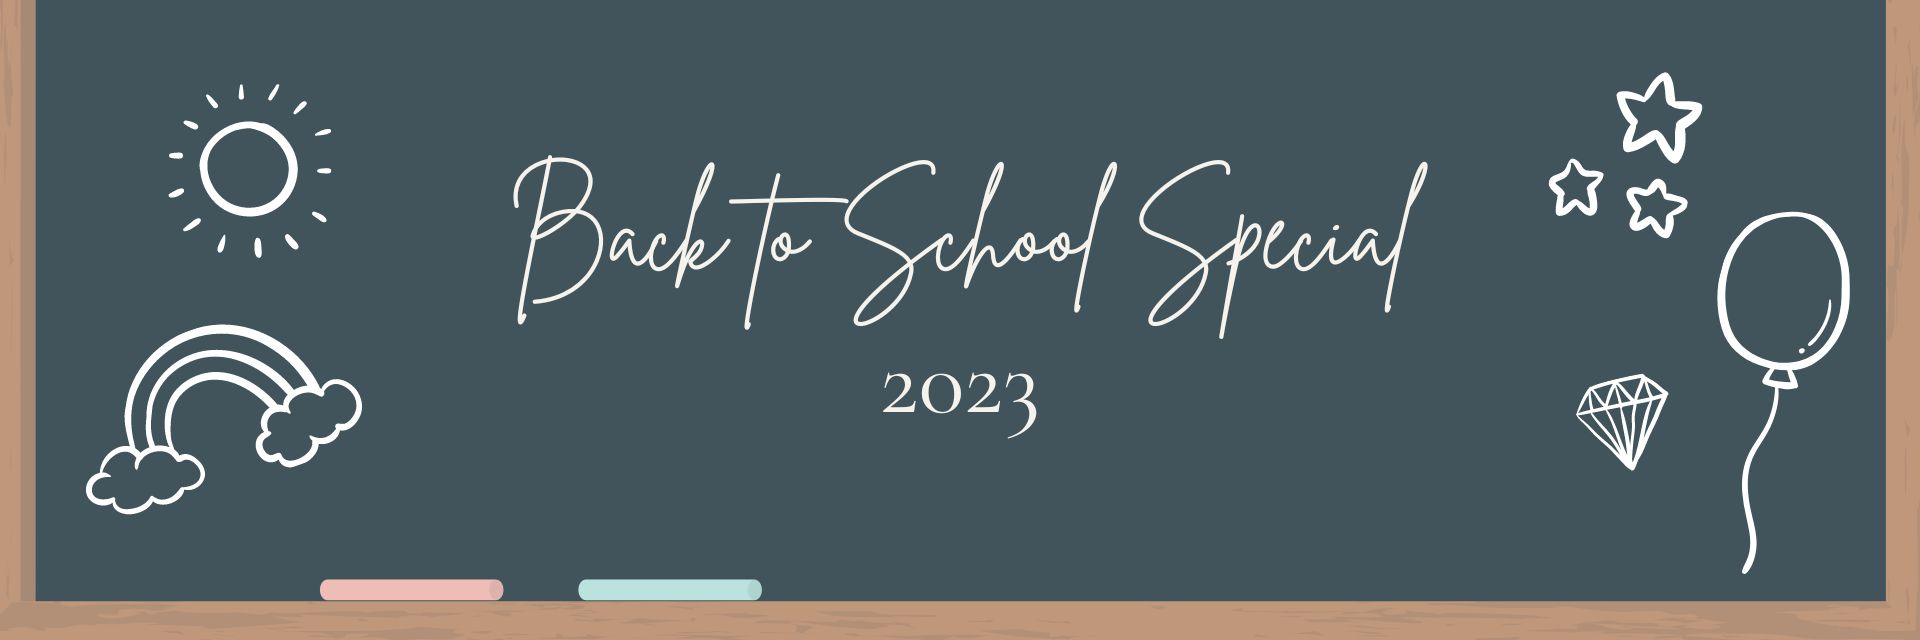 Back to School_Special